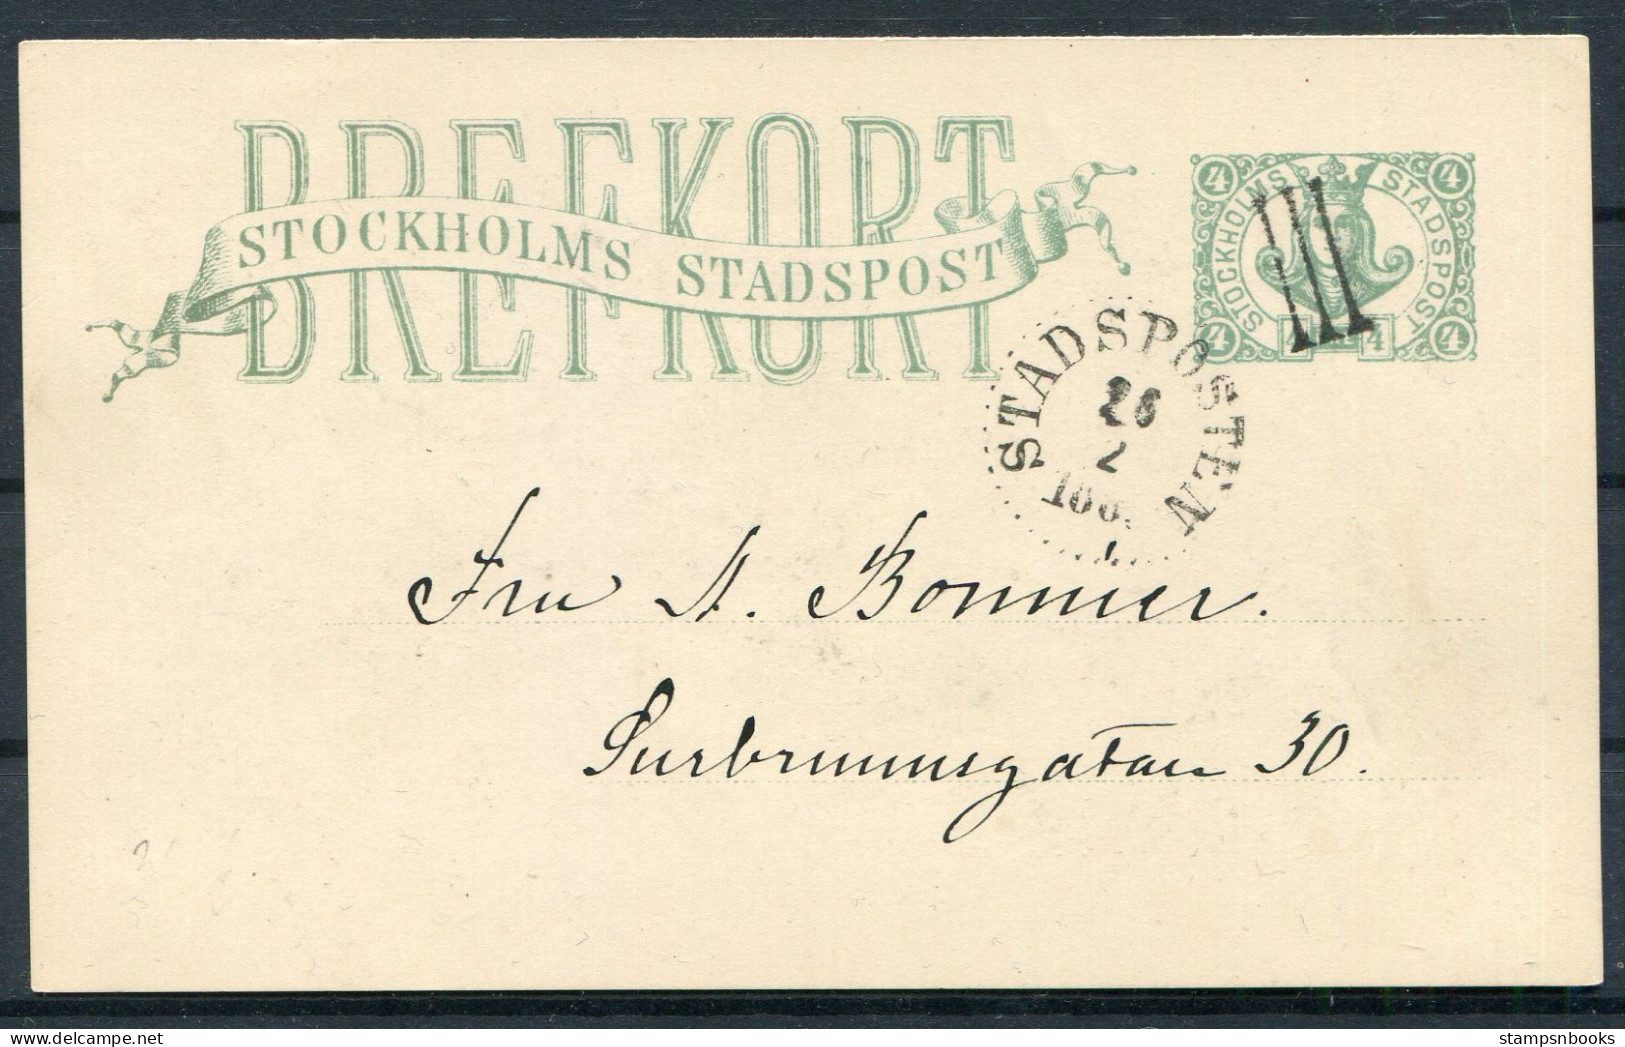 1888 Sweden Stockholm Stadspost Local Post Stationery Postcard - Local Post Stamps